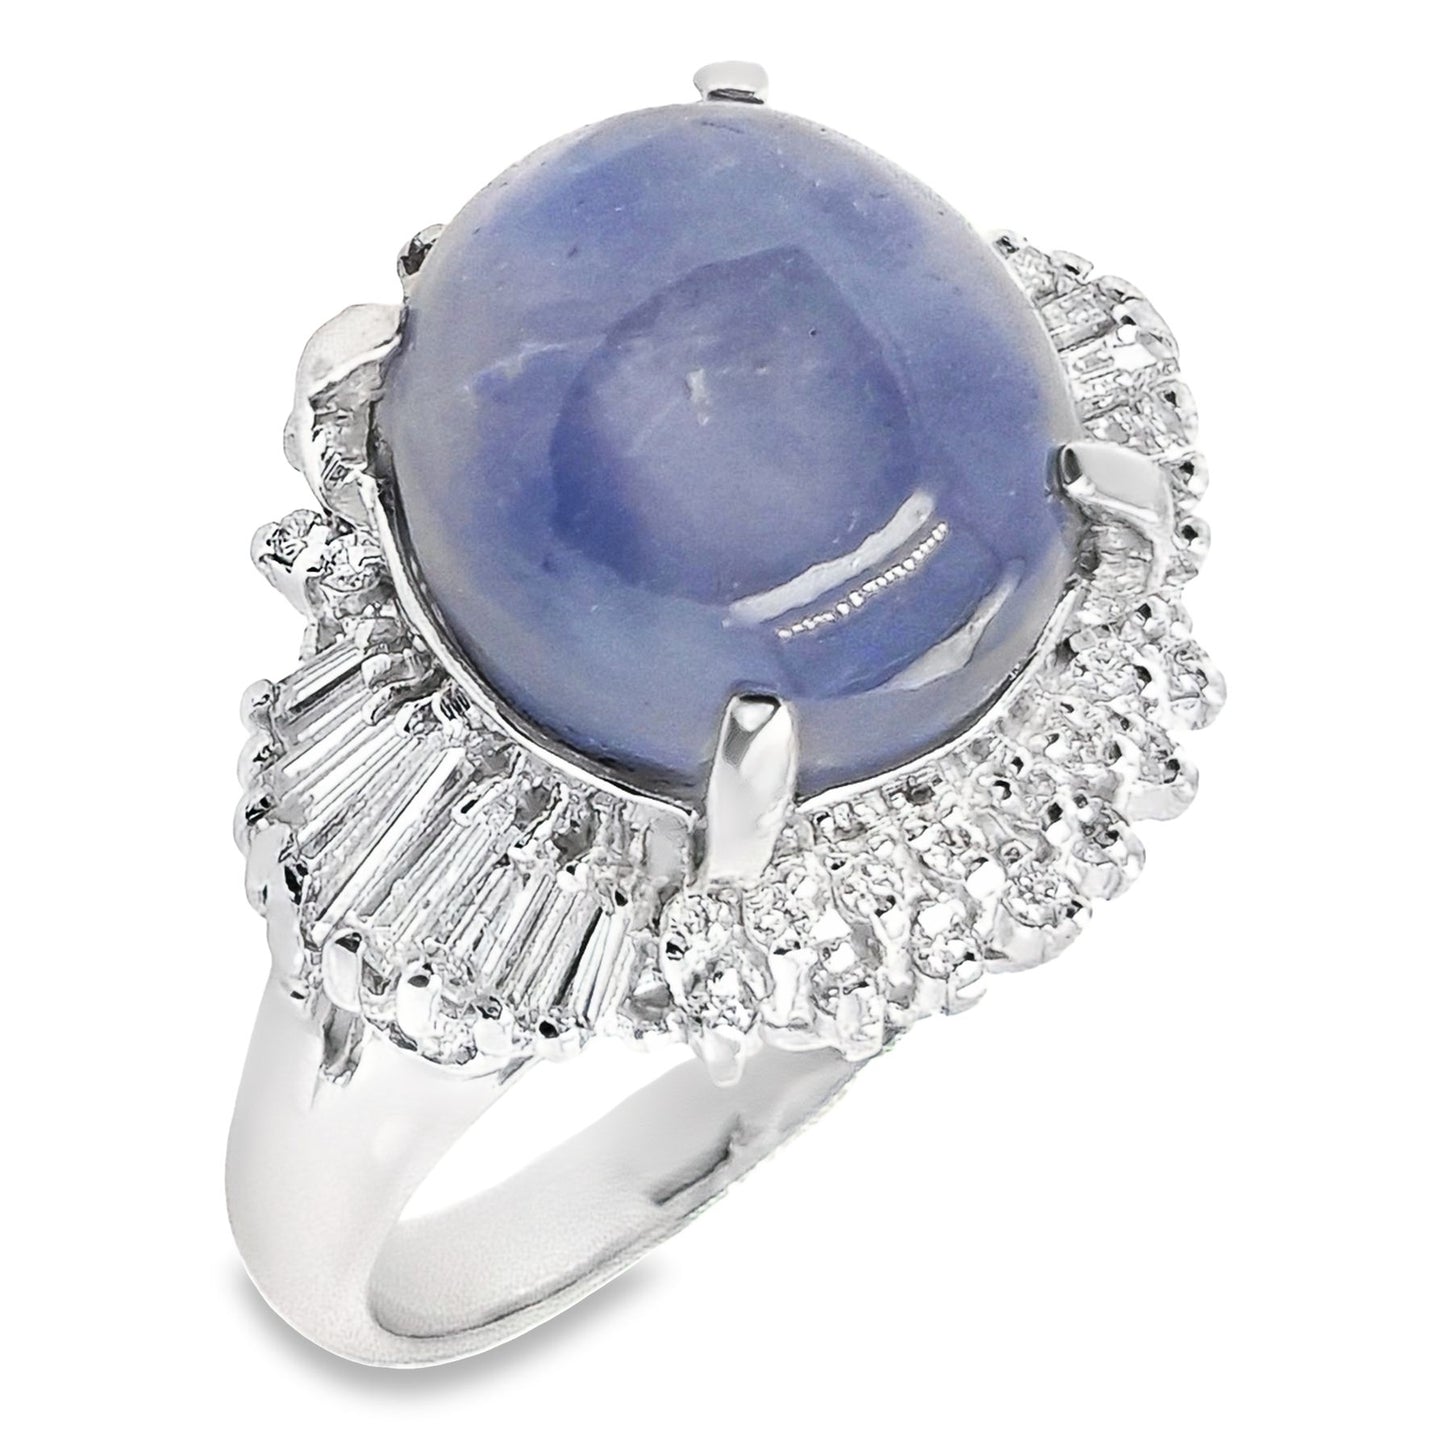 11.75ct NATURAL NOT-HEATED STAR-SAPPHIRE and 0.53ct NATURAL DIAMONDS set in Platinum Ring